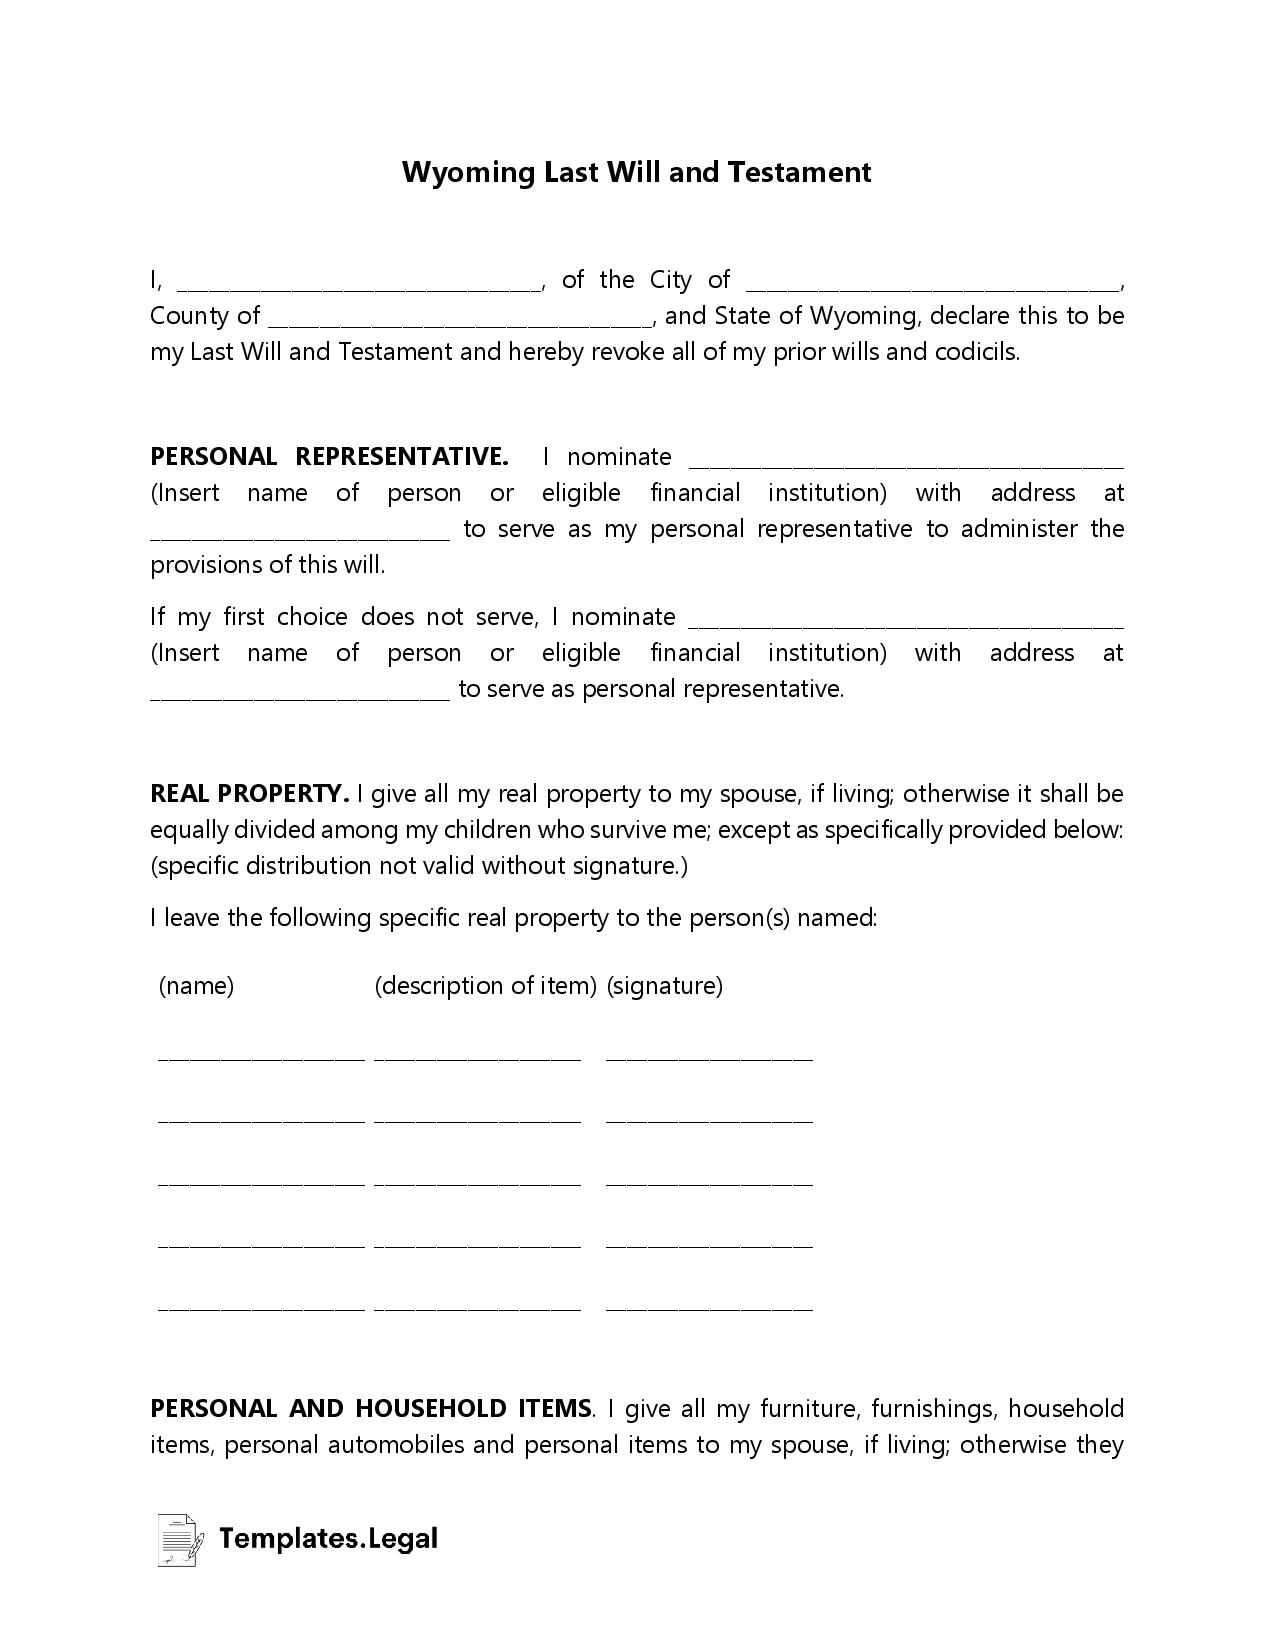 Wyoming Last Will and Testament - Templates.Legal